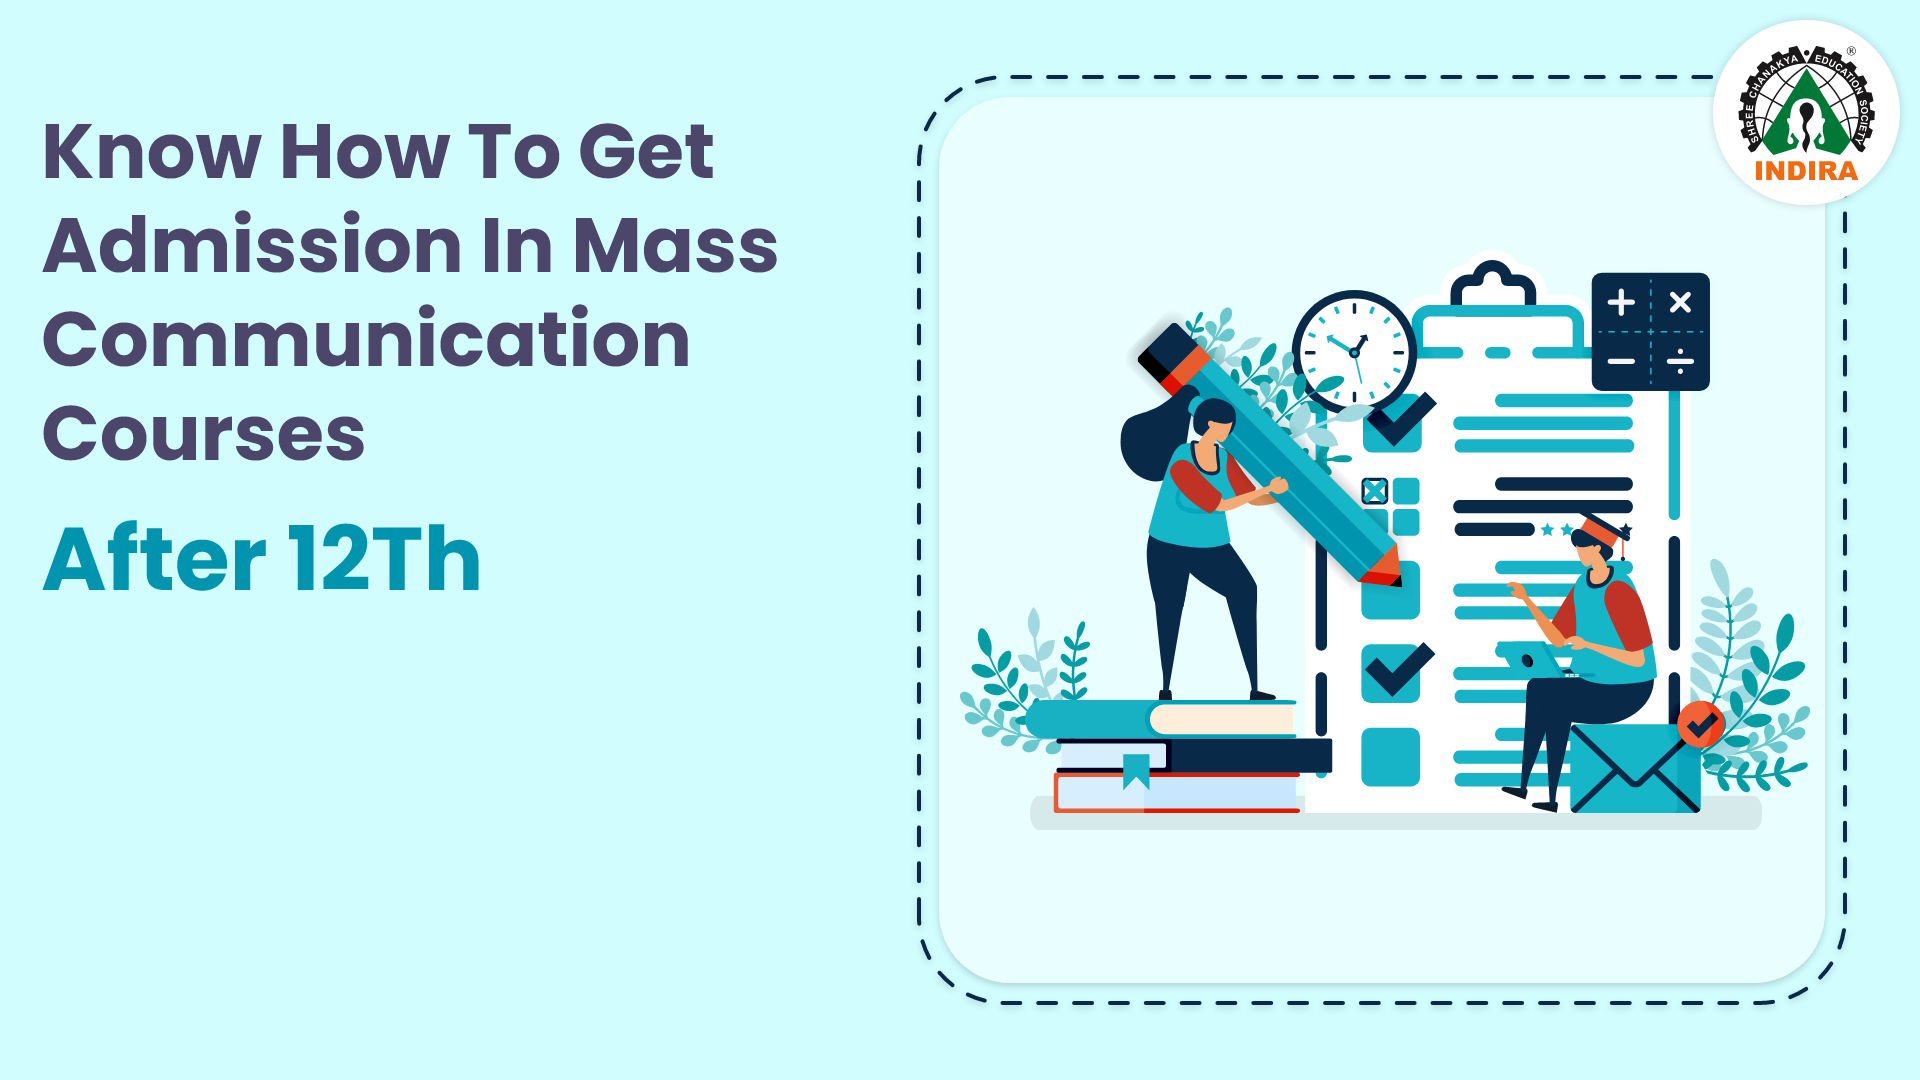 Know How To Get Admission In Mass Communication Courses After 12th